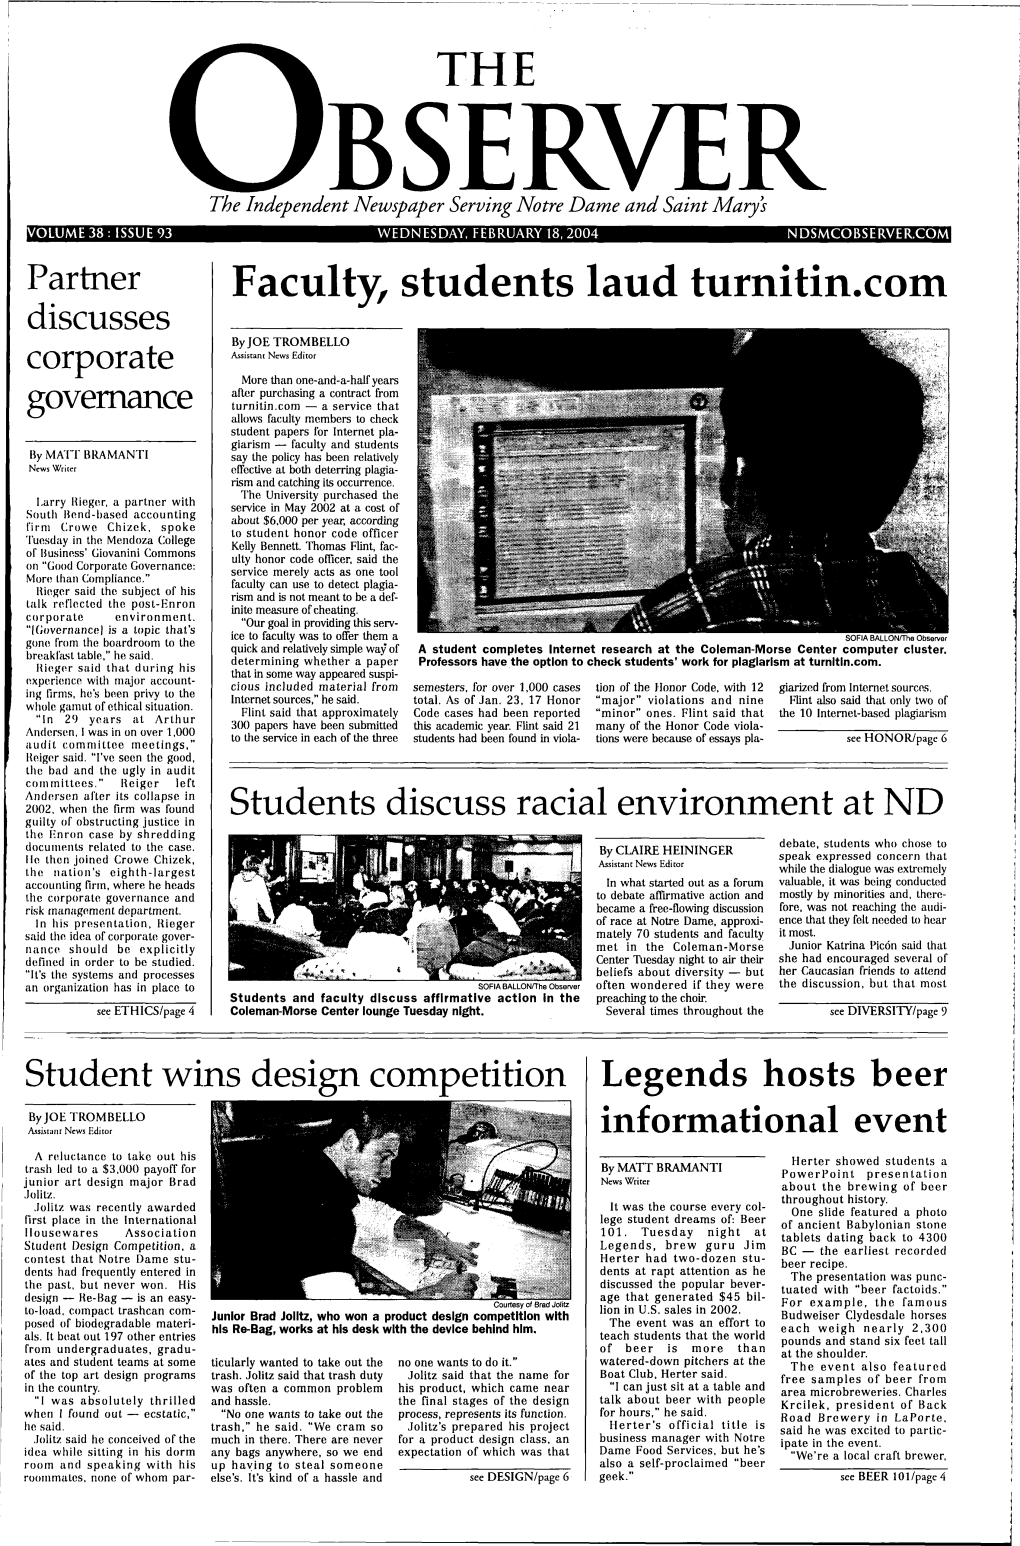 Faculty, Students Laud Turnitin.Com